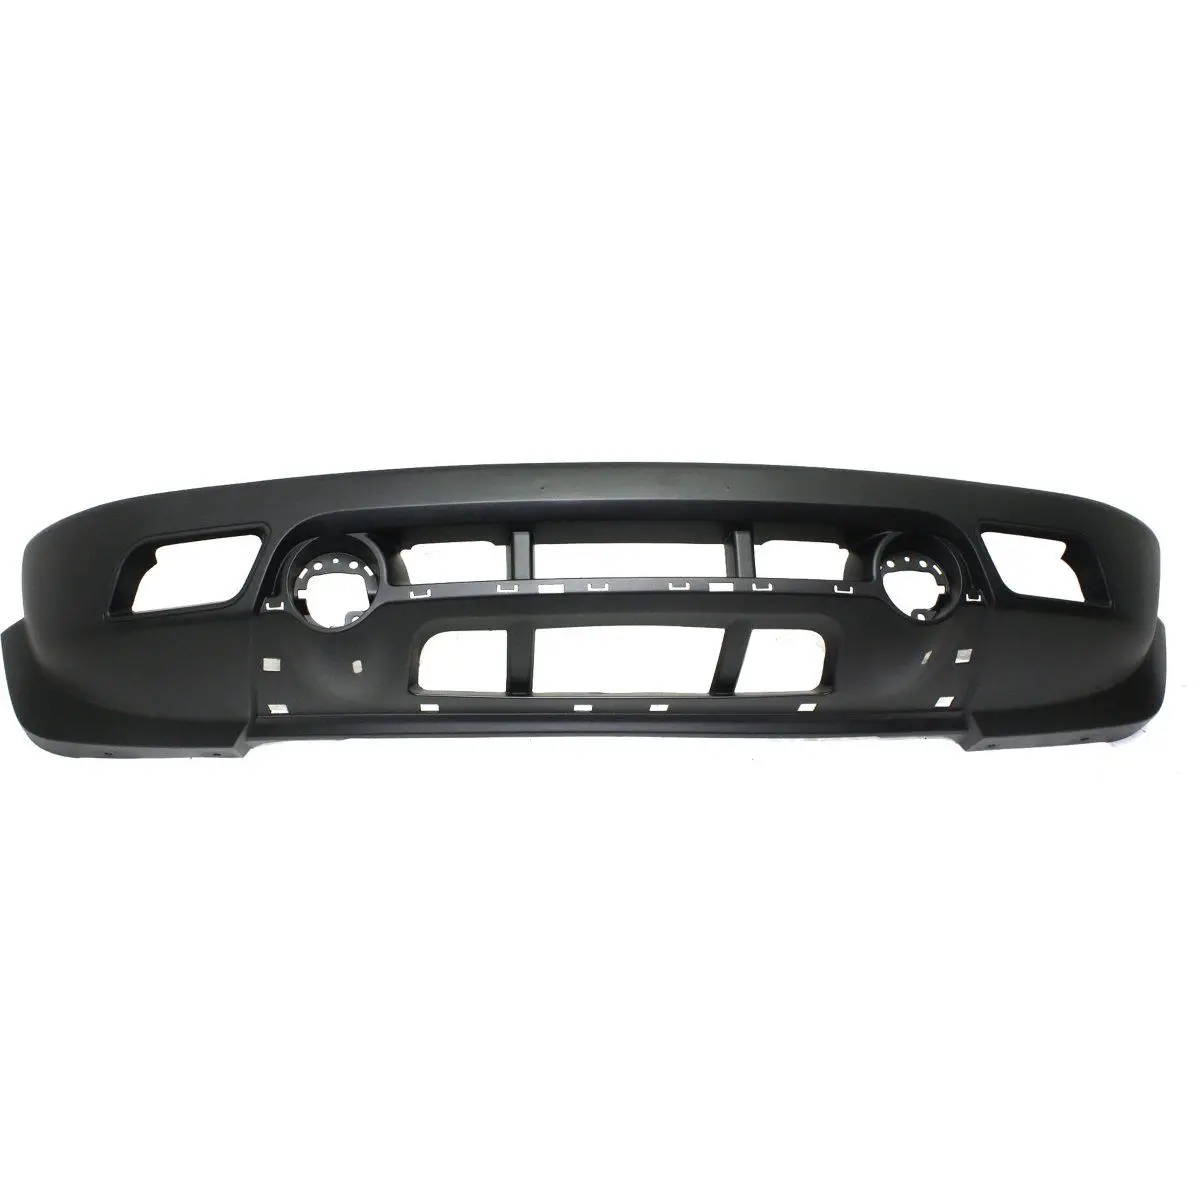 Front Lower Bumper Cover For 2011